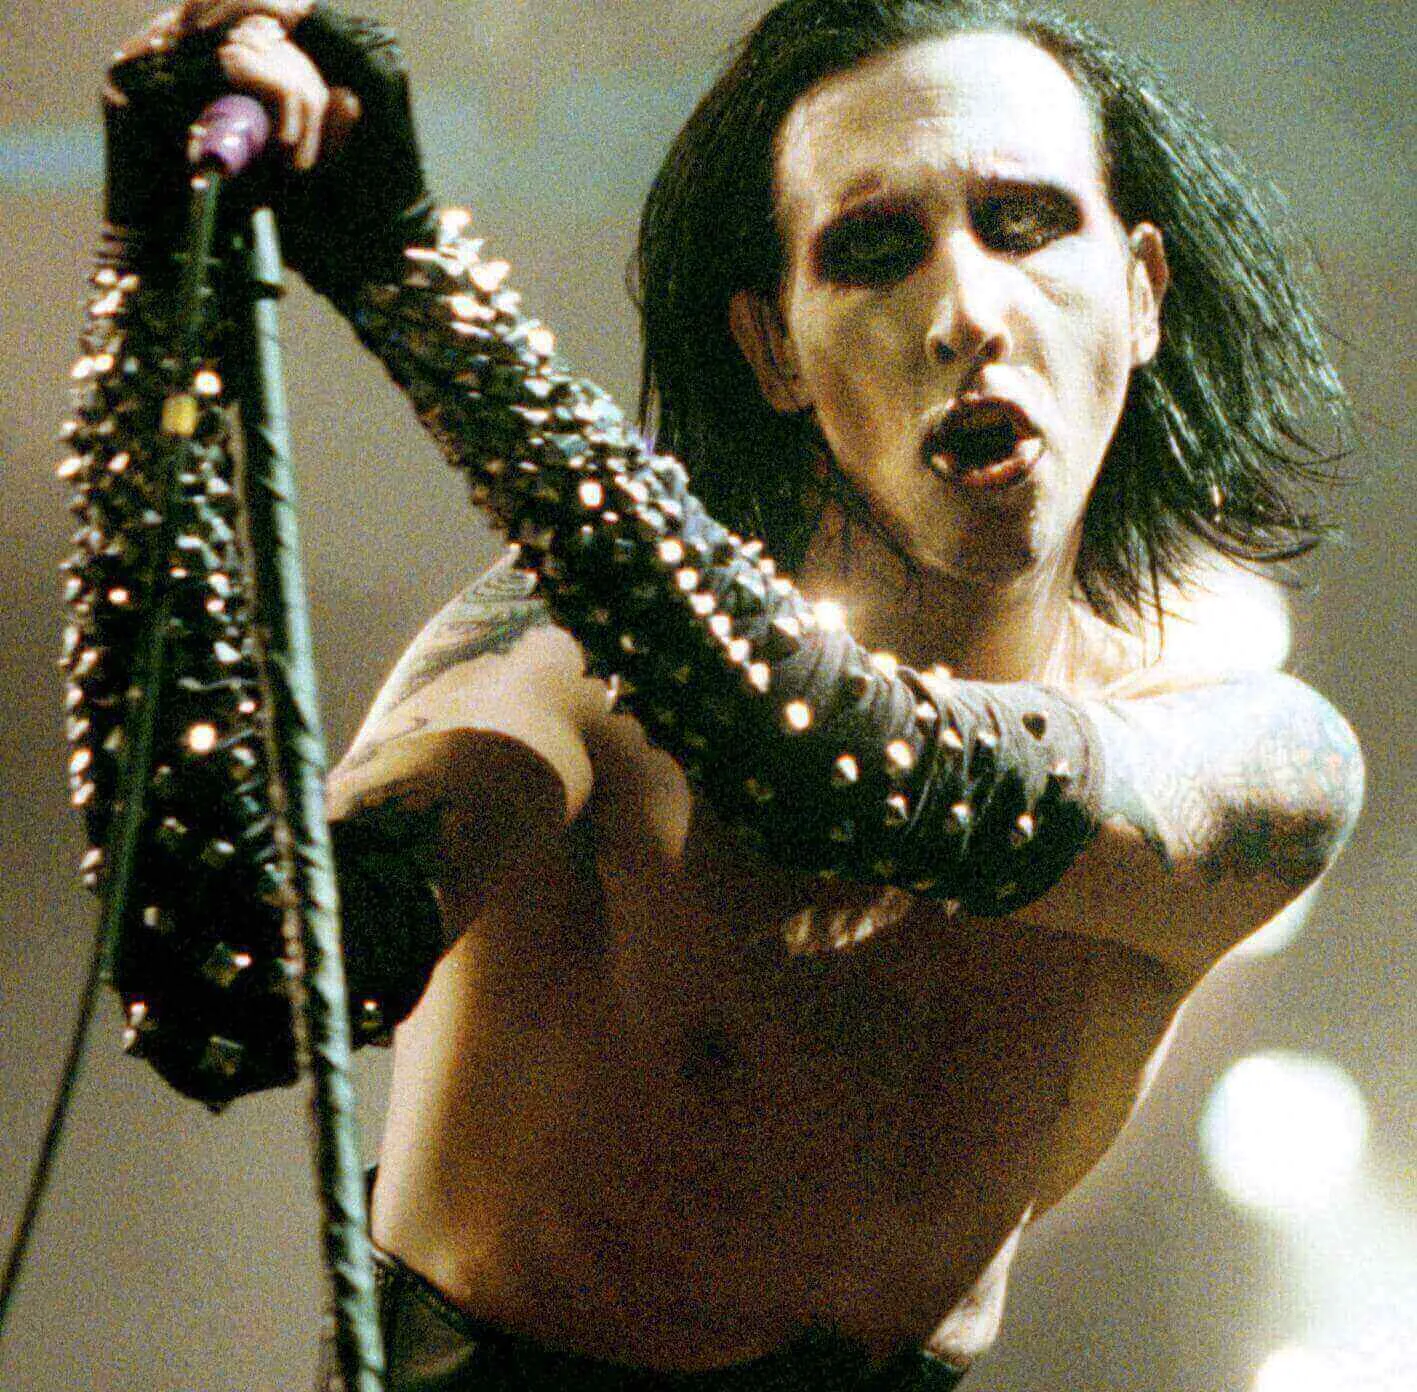 "As Sick As the Secrets Within" star Marilyn Manson with a microphone